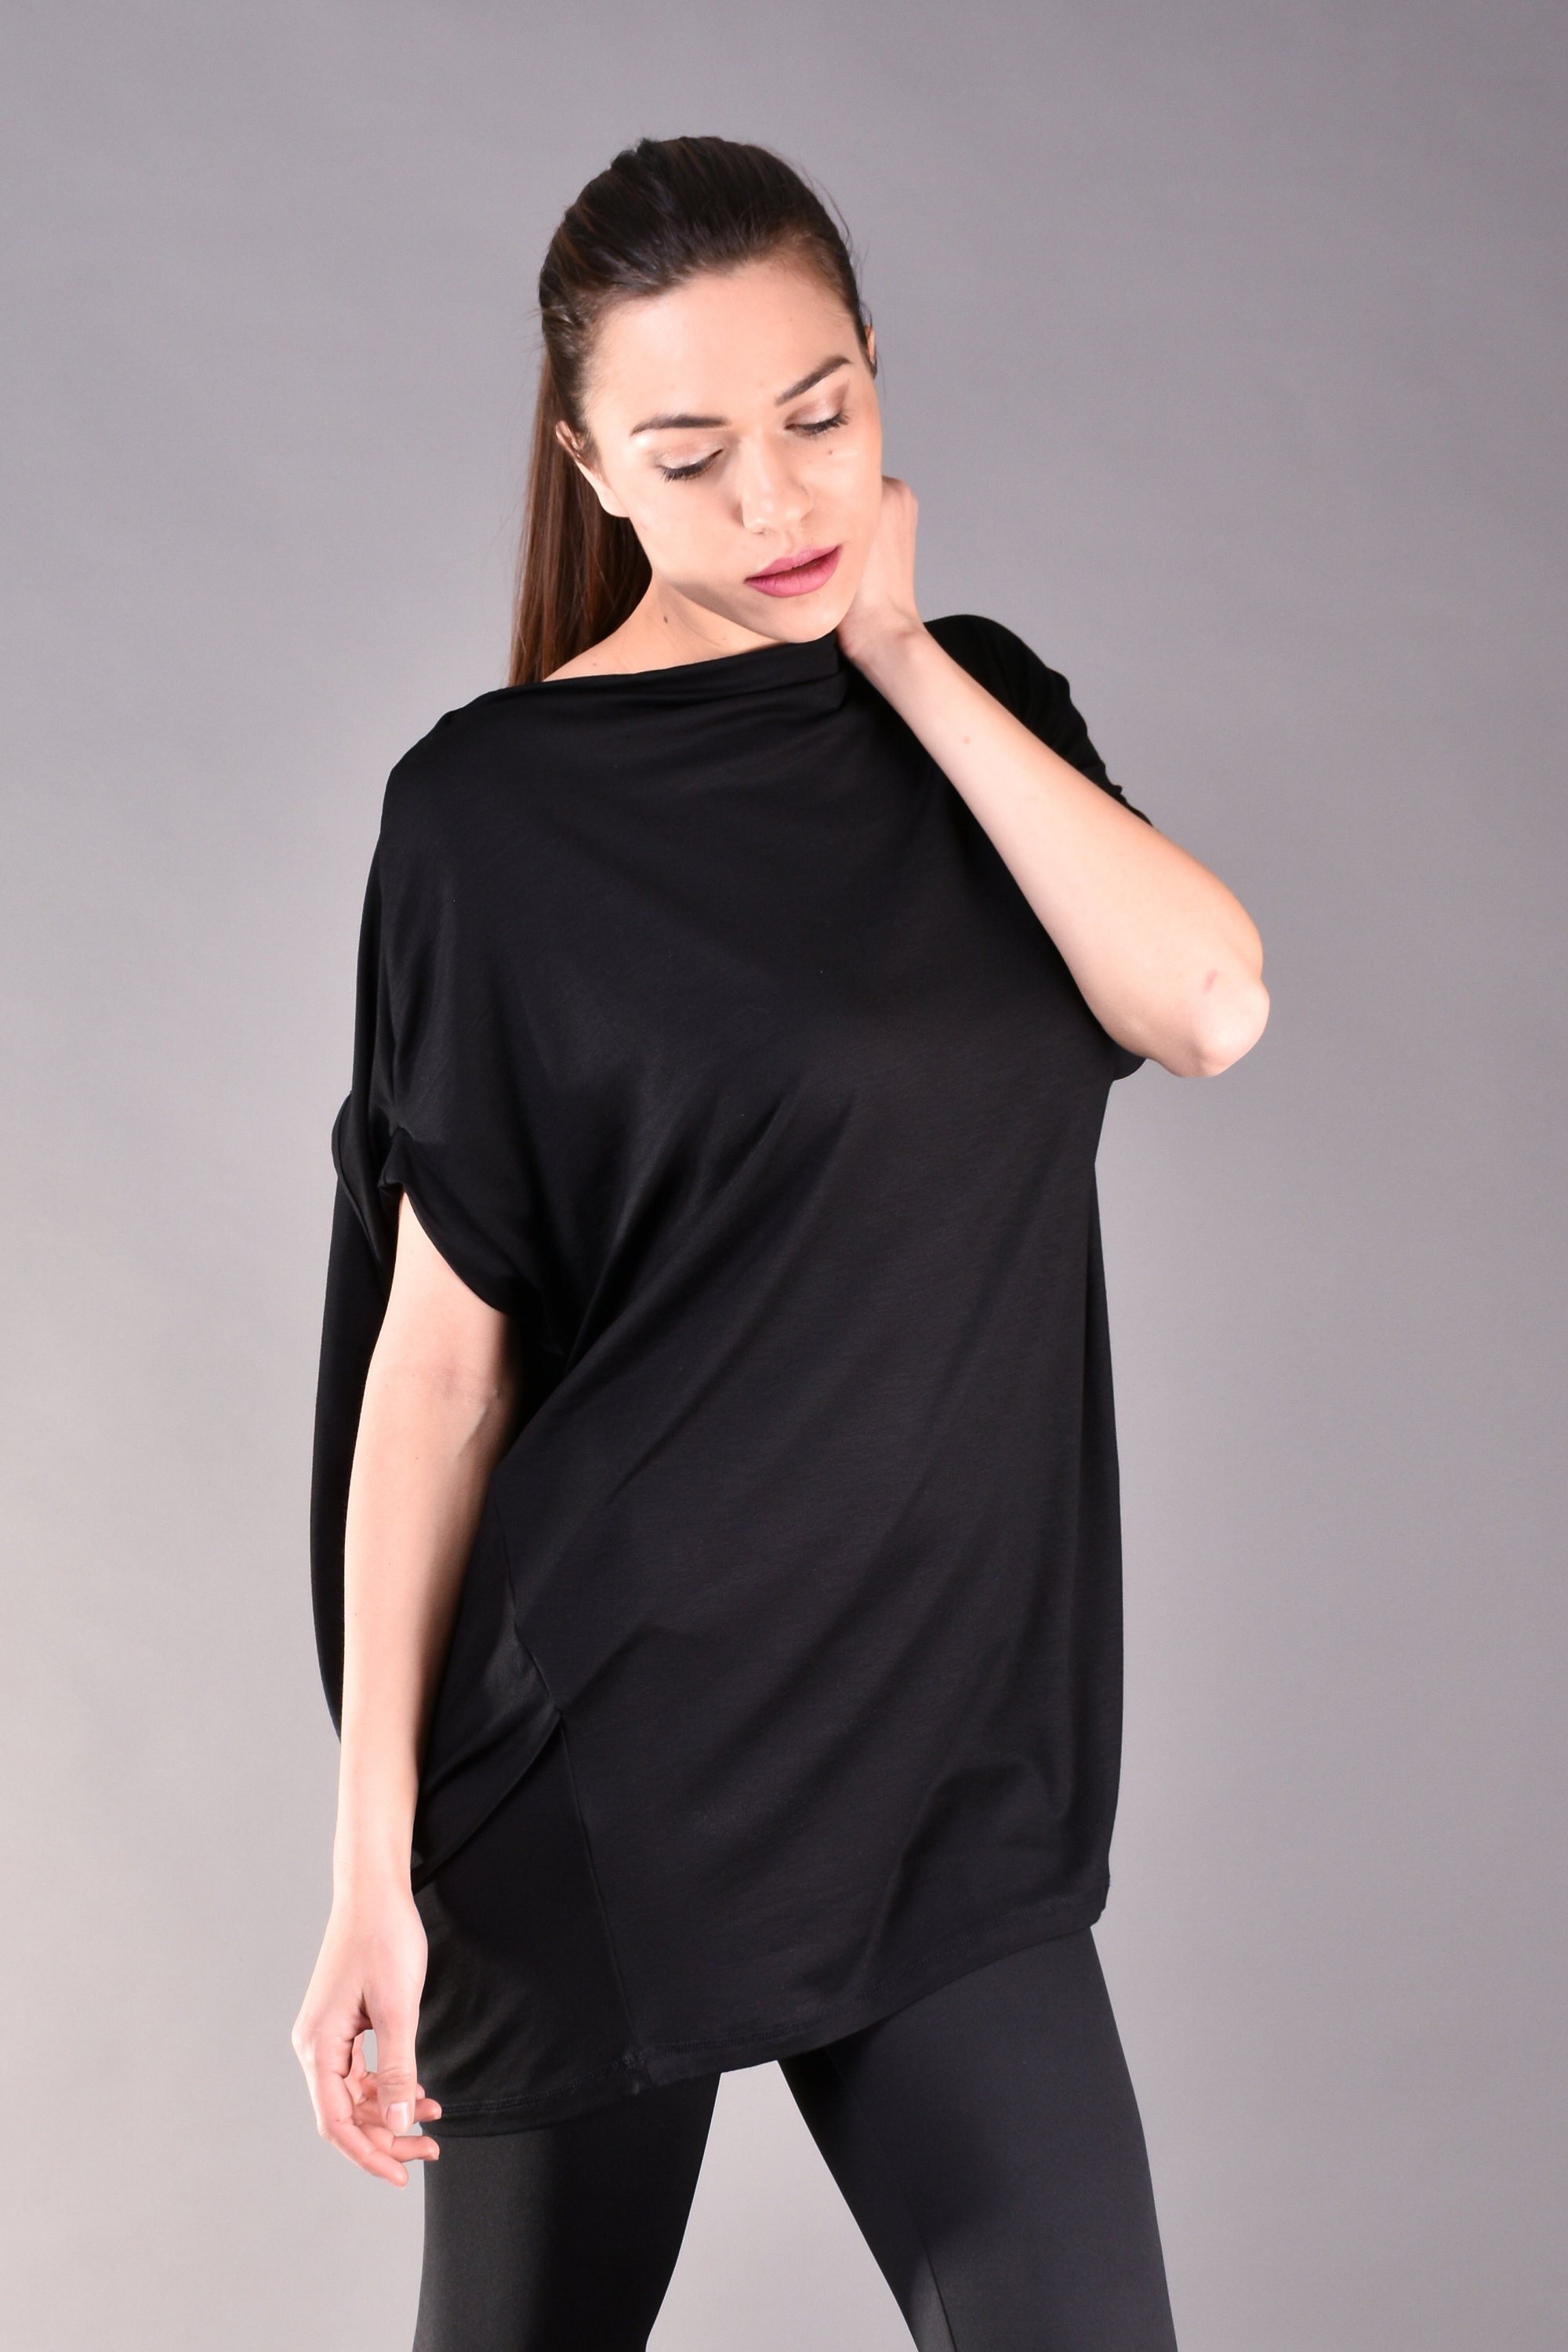 Black Top Womens Blouse Plus Size Clothing Casual Top - Etsy